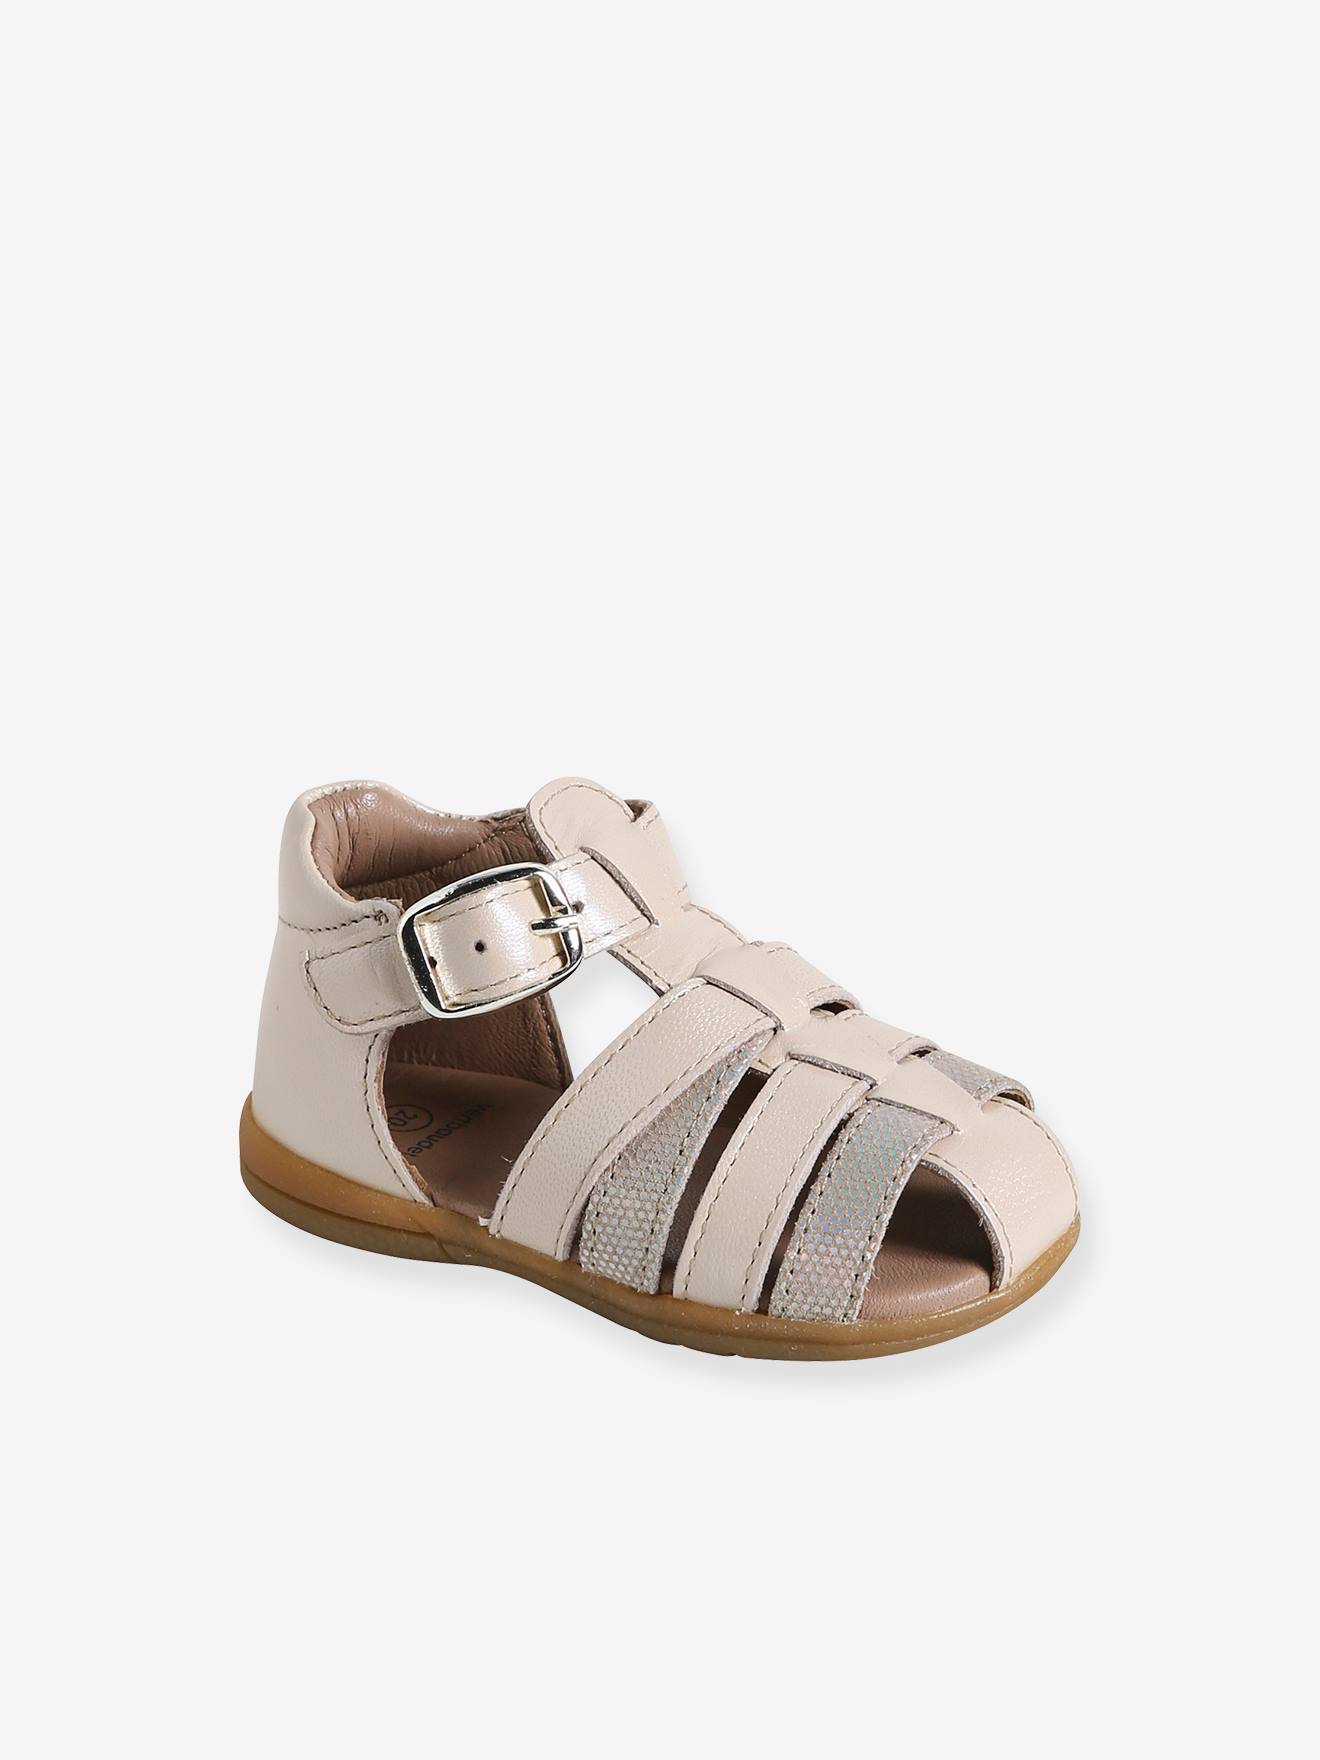 Leather Sandals for Baby Girls, Designed for First Steps iridescent beige